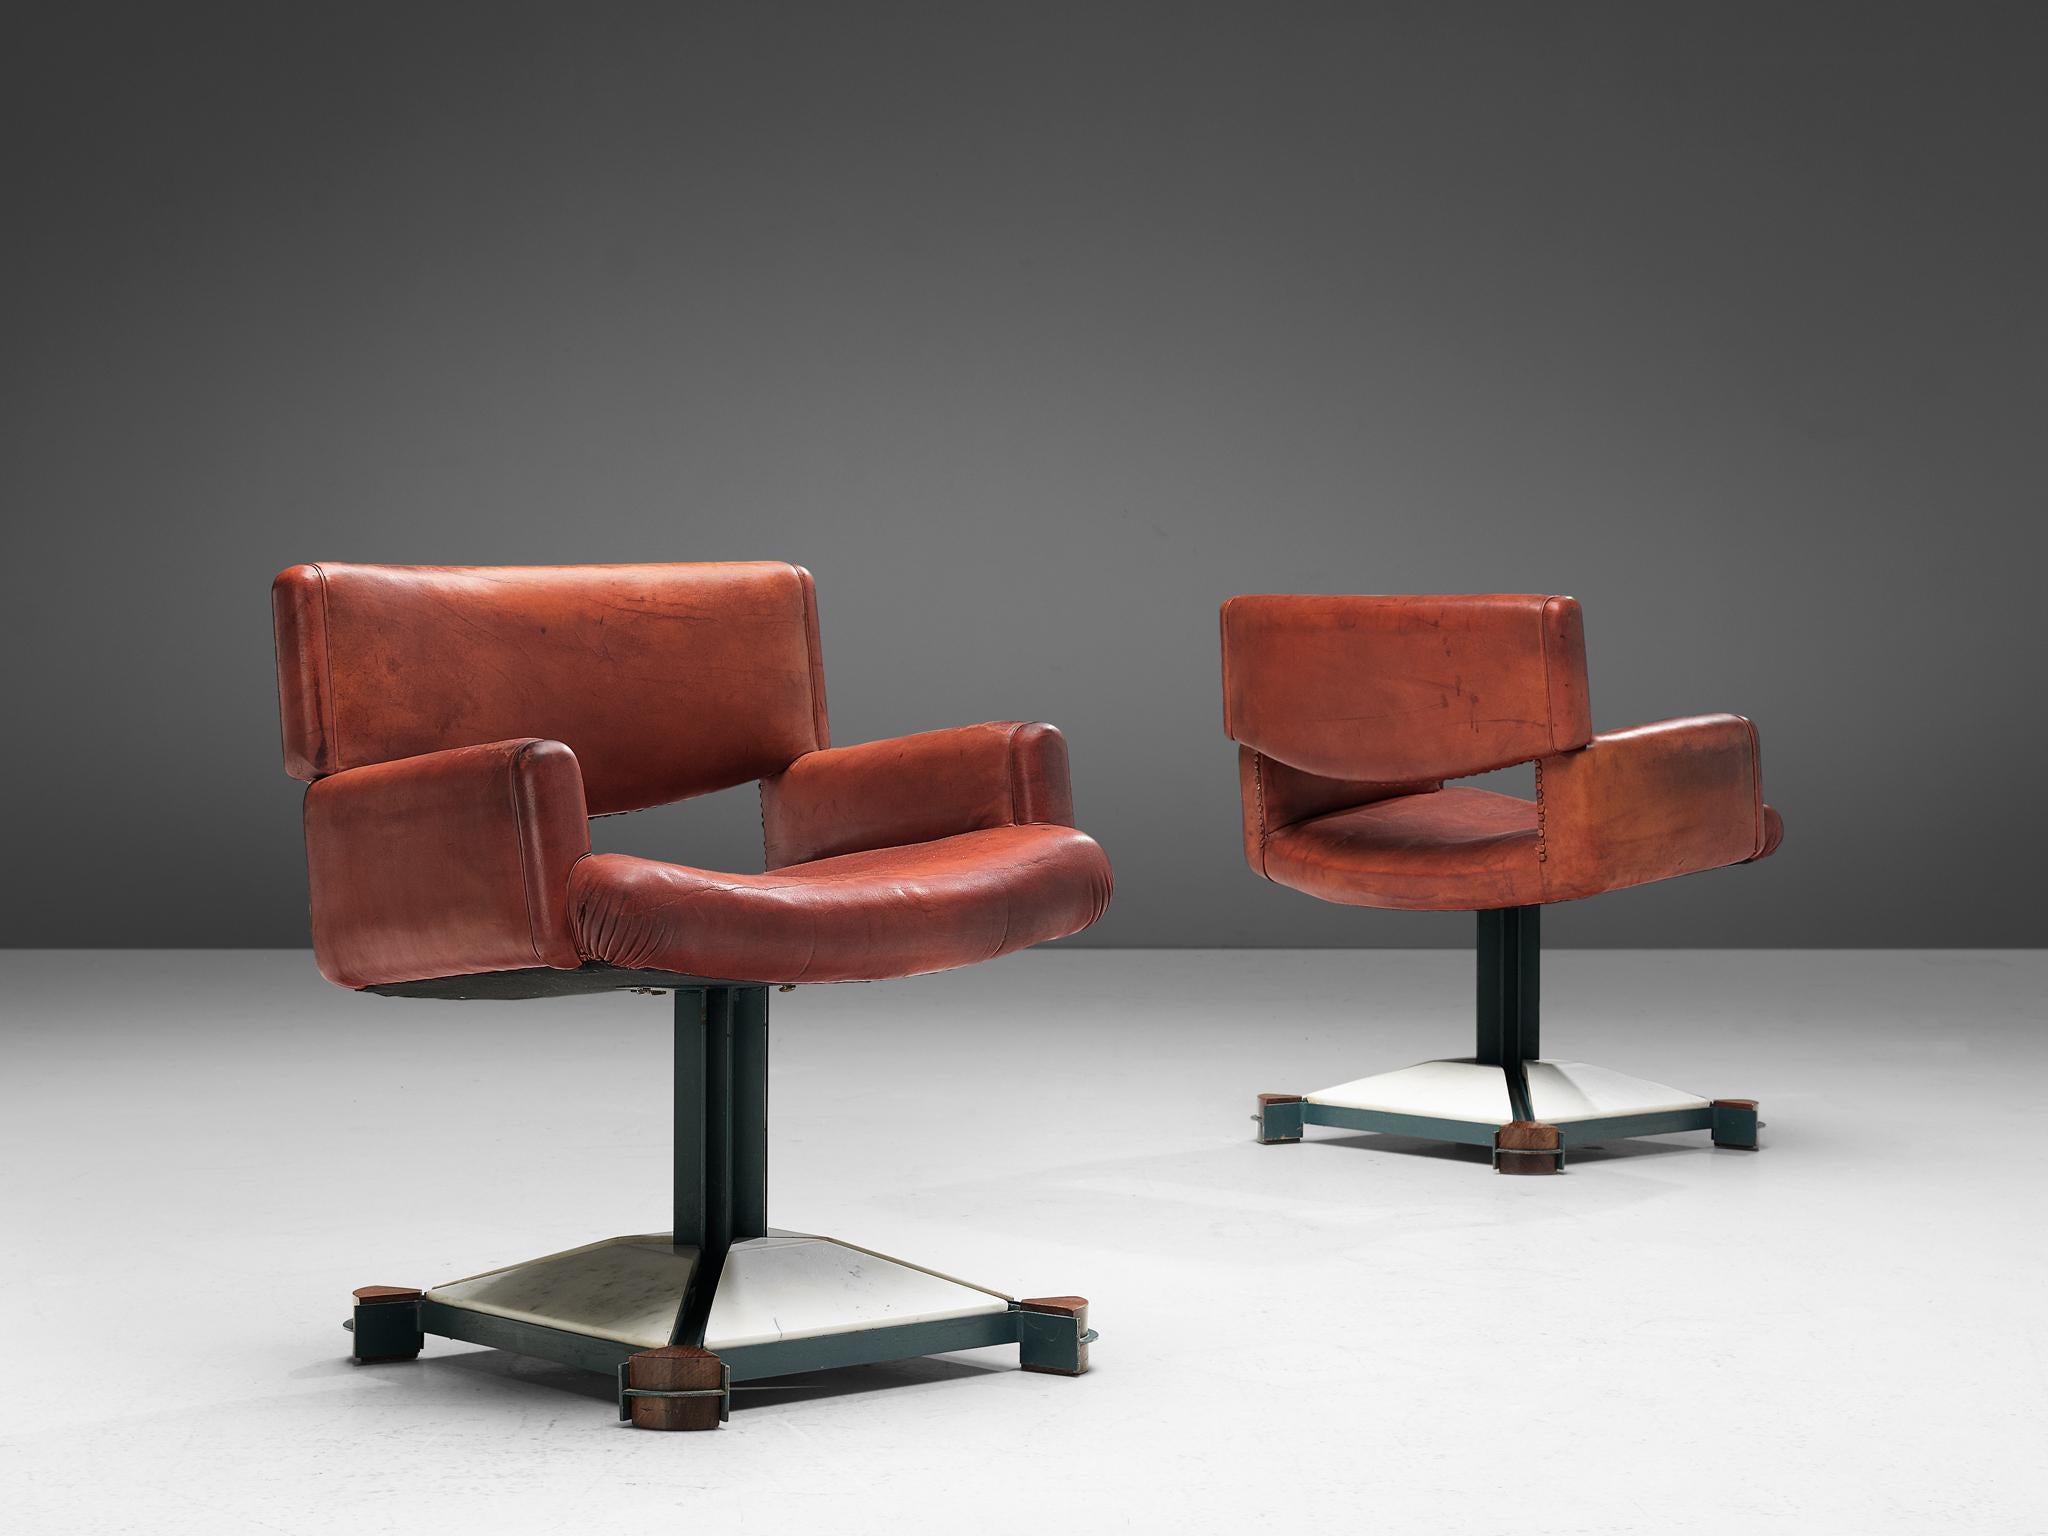 Steel Italian Pair of Armchairs in Original Patinated Red Leather